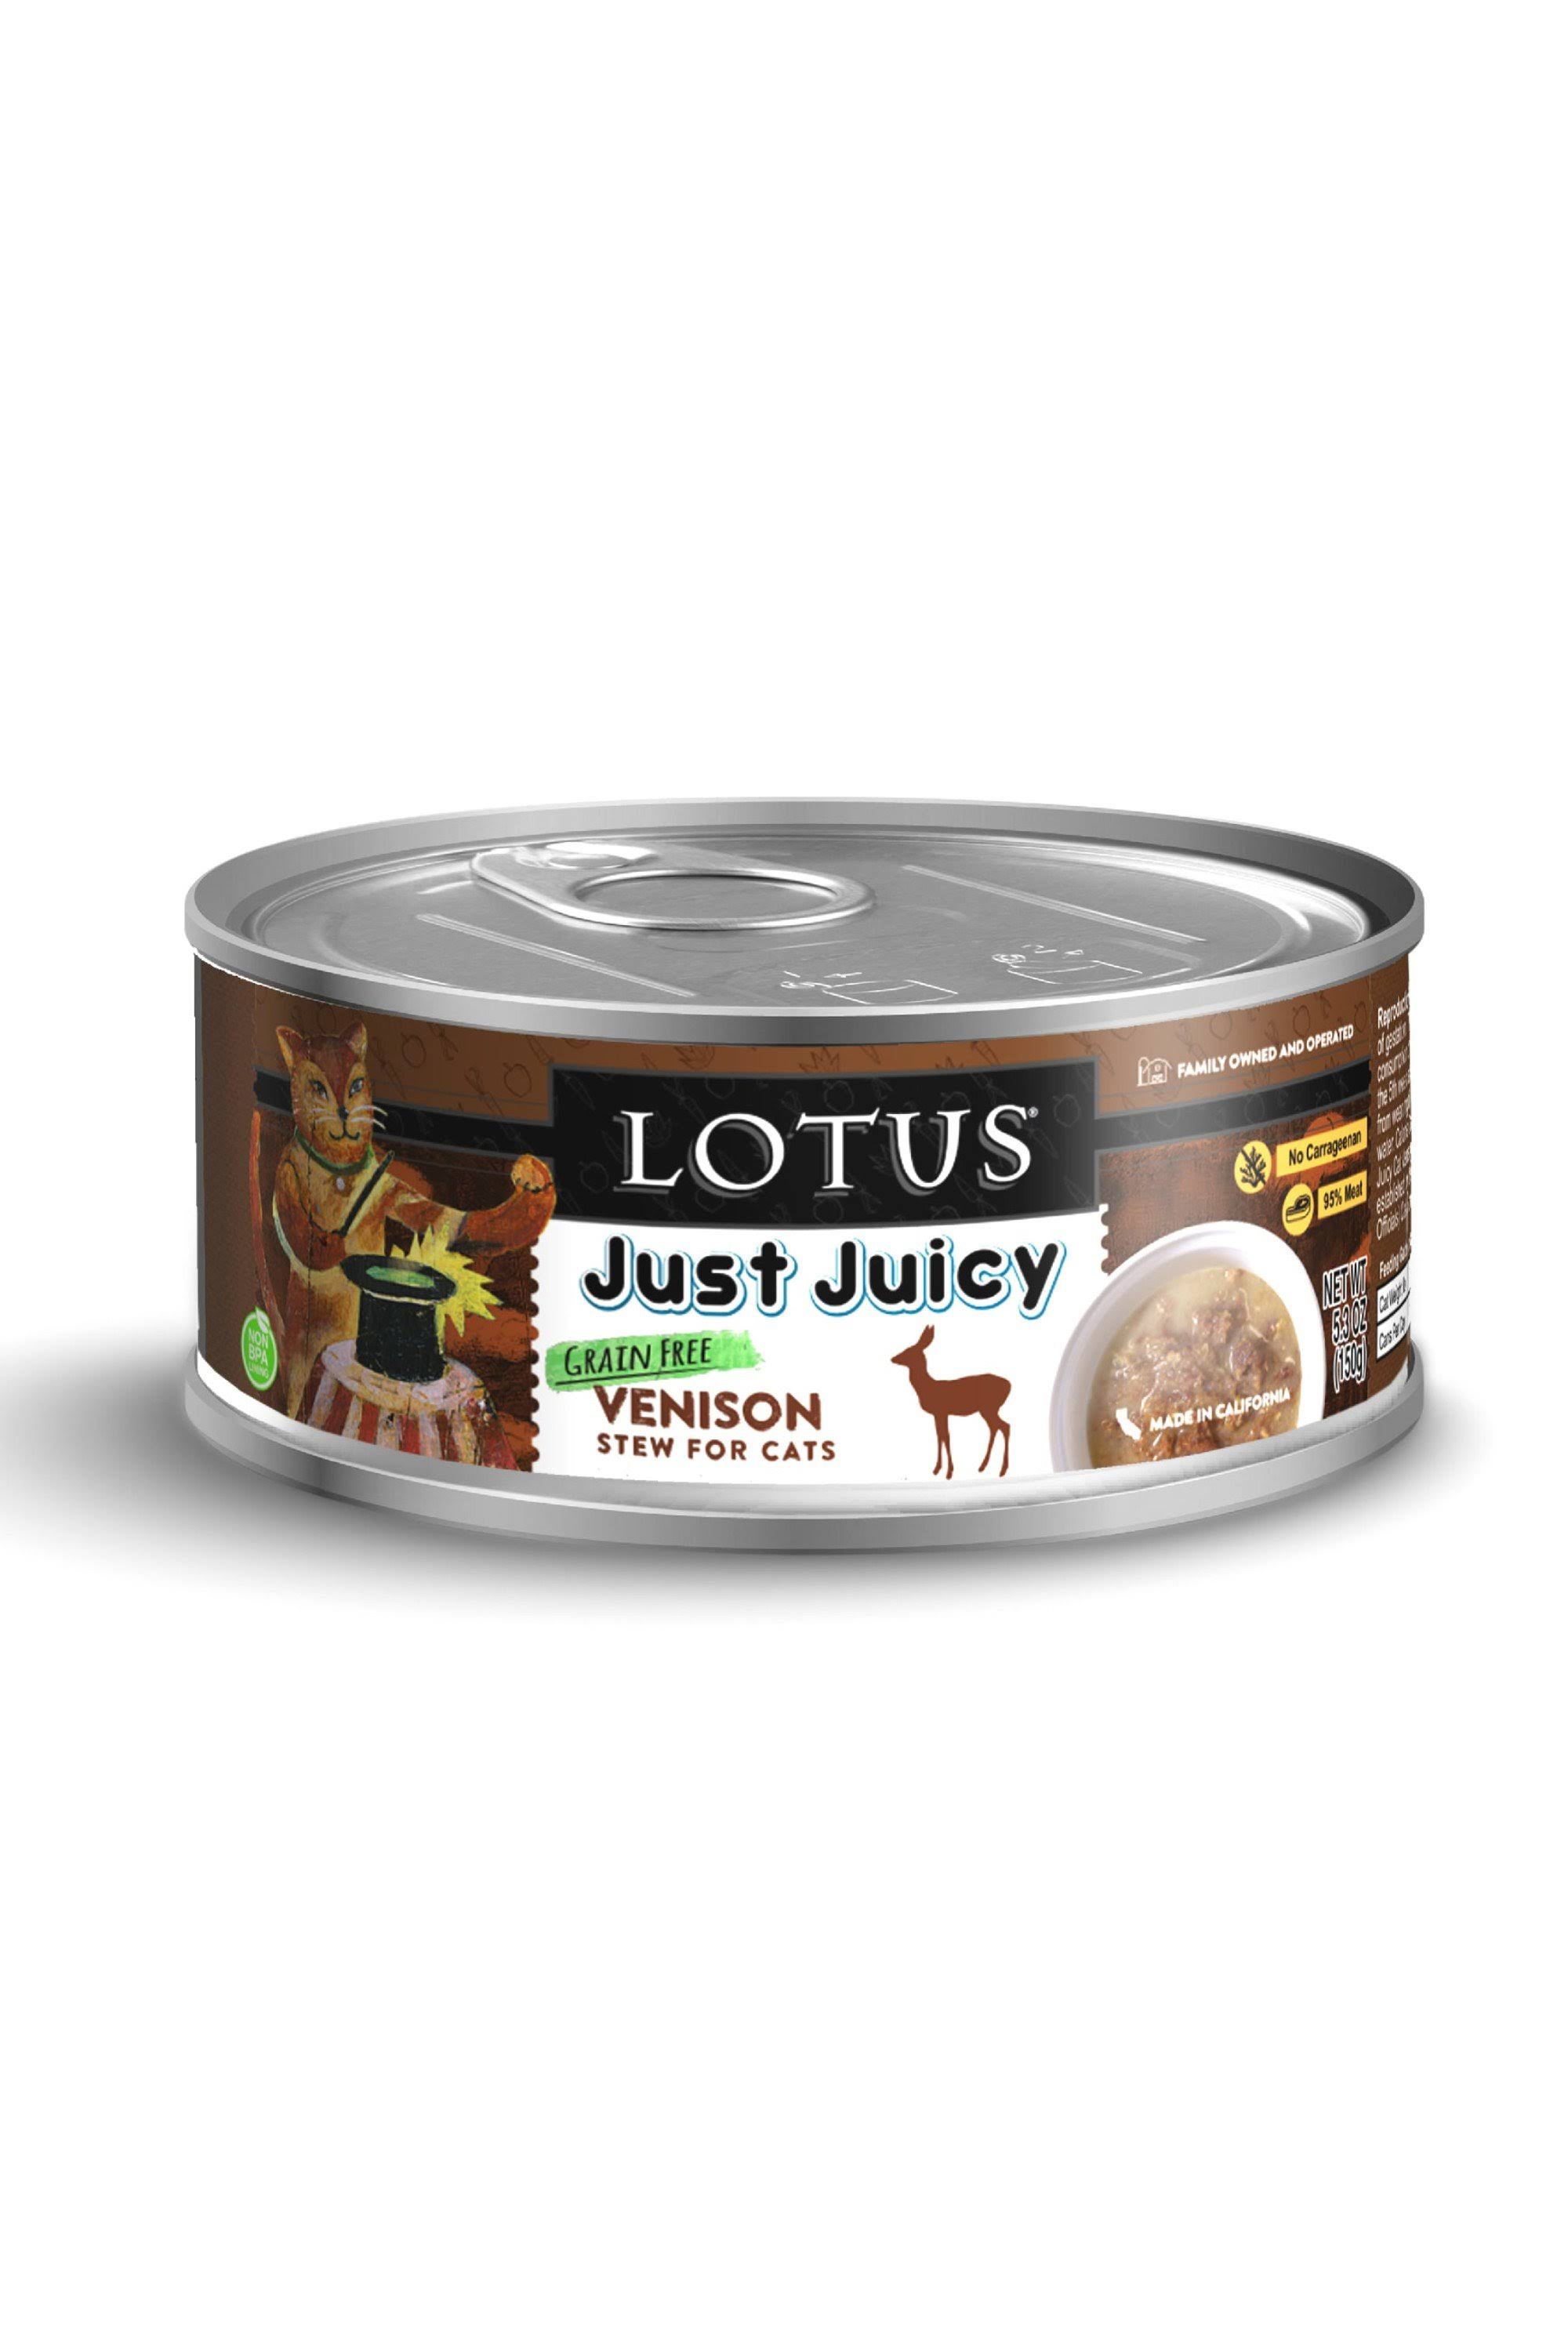 Lotus Just Juicy Venison Stew Canned Cat Food / 5.3 oz